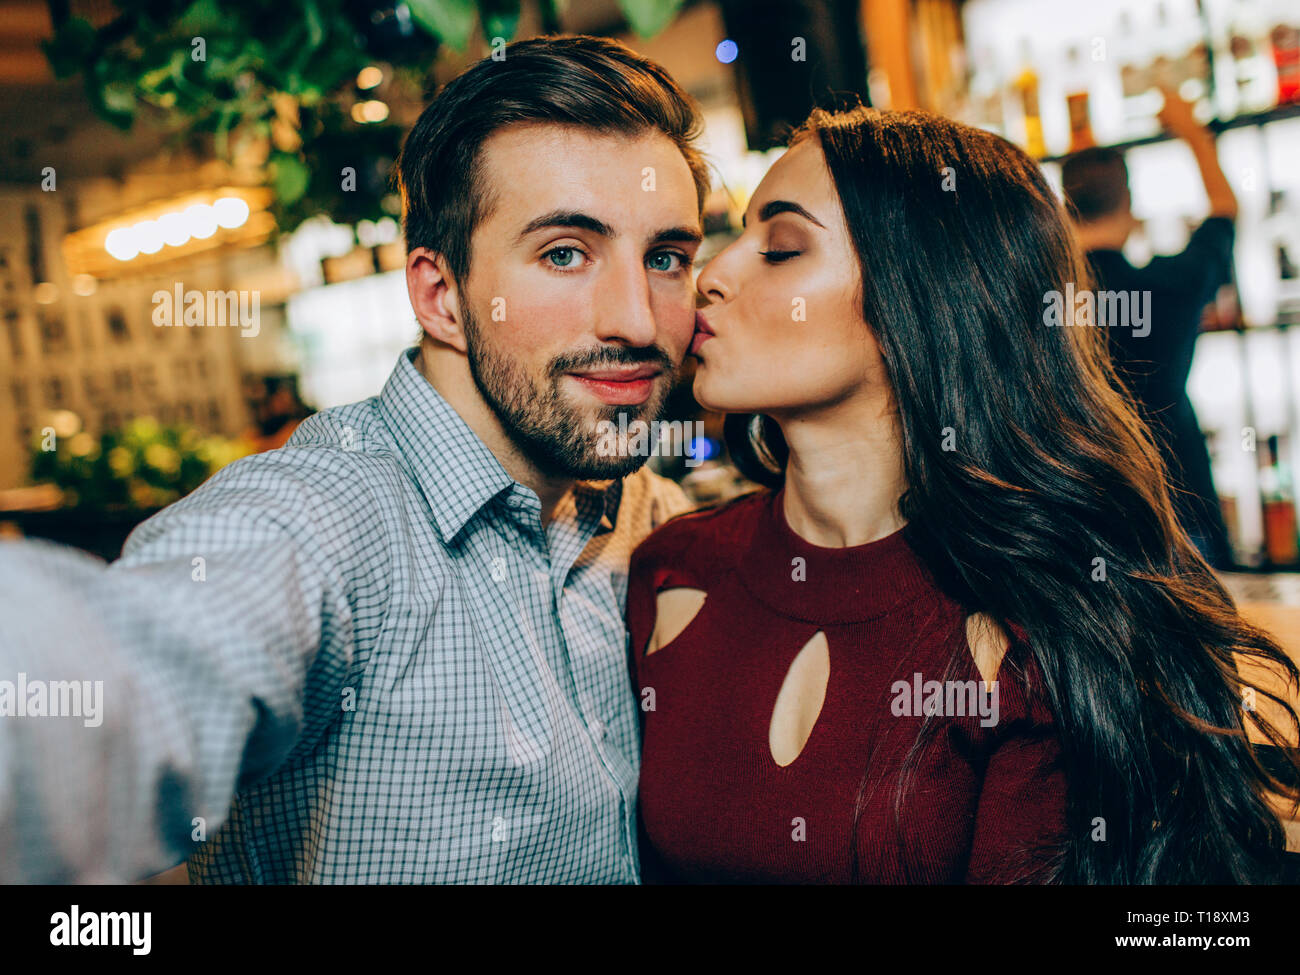 Another Selfie Of Couple Girl Is Kissing Her Partner While He Is Taking A Picture They Look